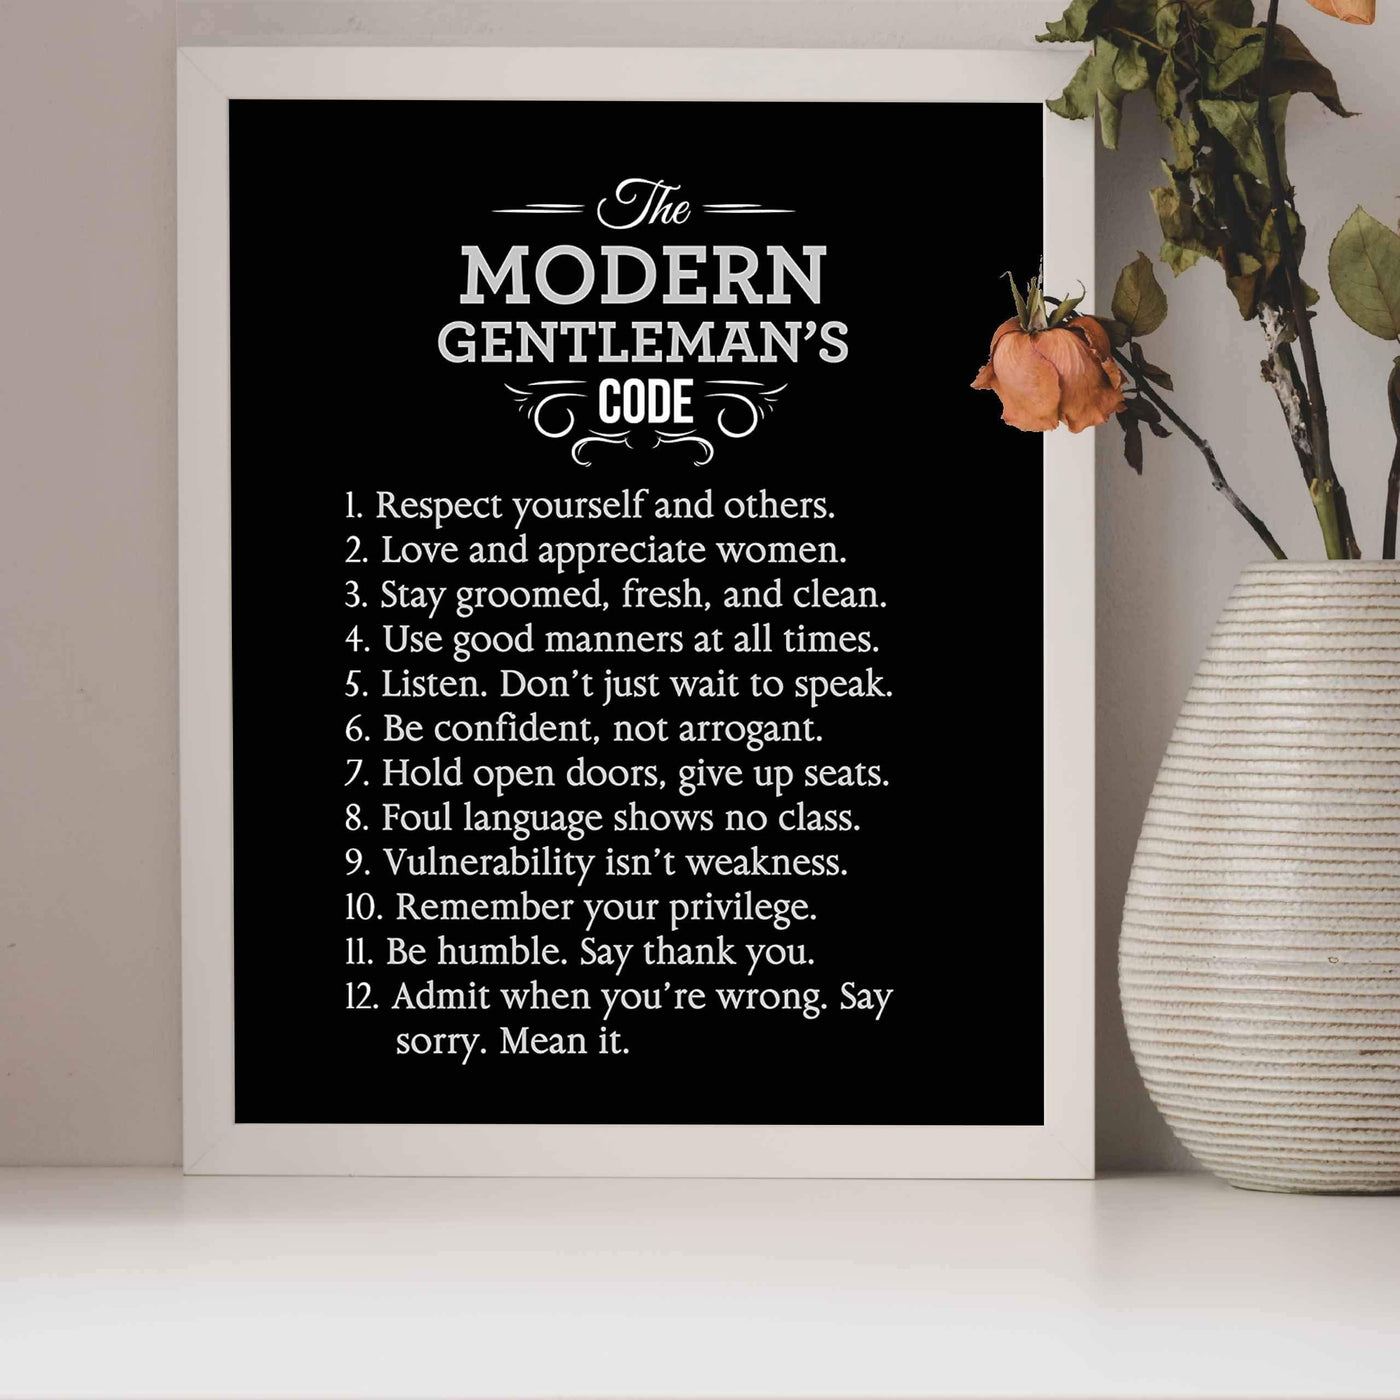 The Modern Gentleman's Code Motivational Quotes Wall Art Sign -8 x 10" Vintage Typographic Poster Print-Ready to Frame. Perfect Home-Office-Man Cave-Shop Decor. Great Advice for All Gentlemen!